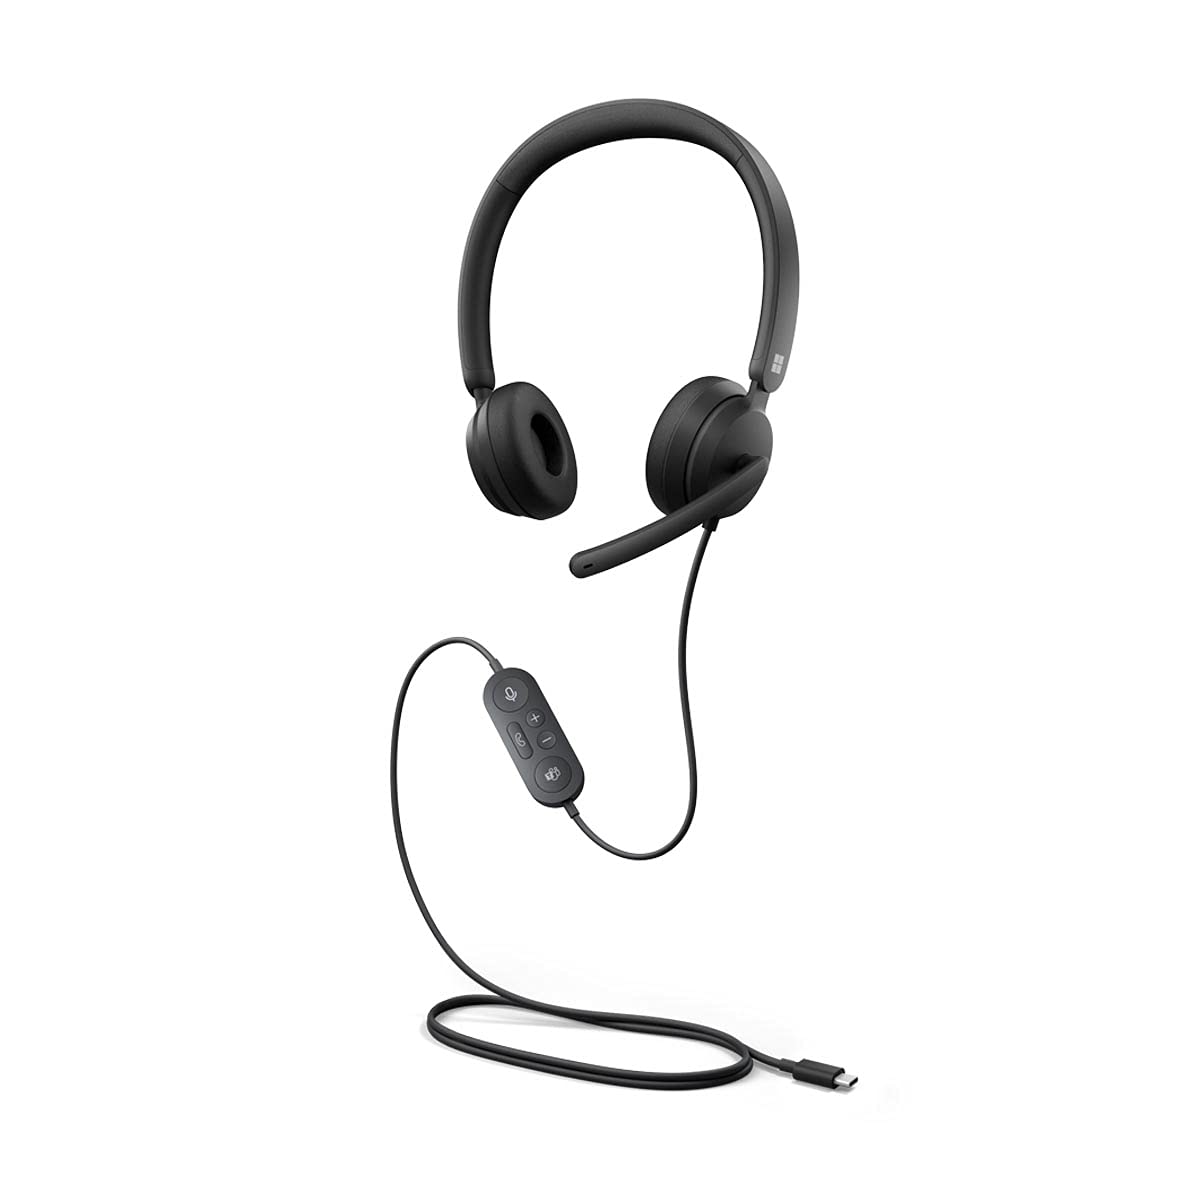 Microsoft Modern USB-C Headset - Wired Headset,On-Ear Stereo Headphones with Noise-Cancelling Microphone, USB-C Connectivity, in-Line Controls, PC/Mac/Laptop - Certified Teams (Open Box, Like New)